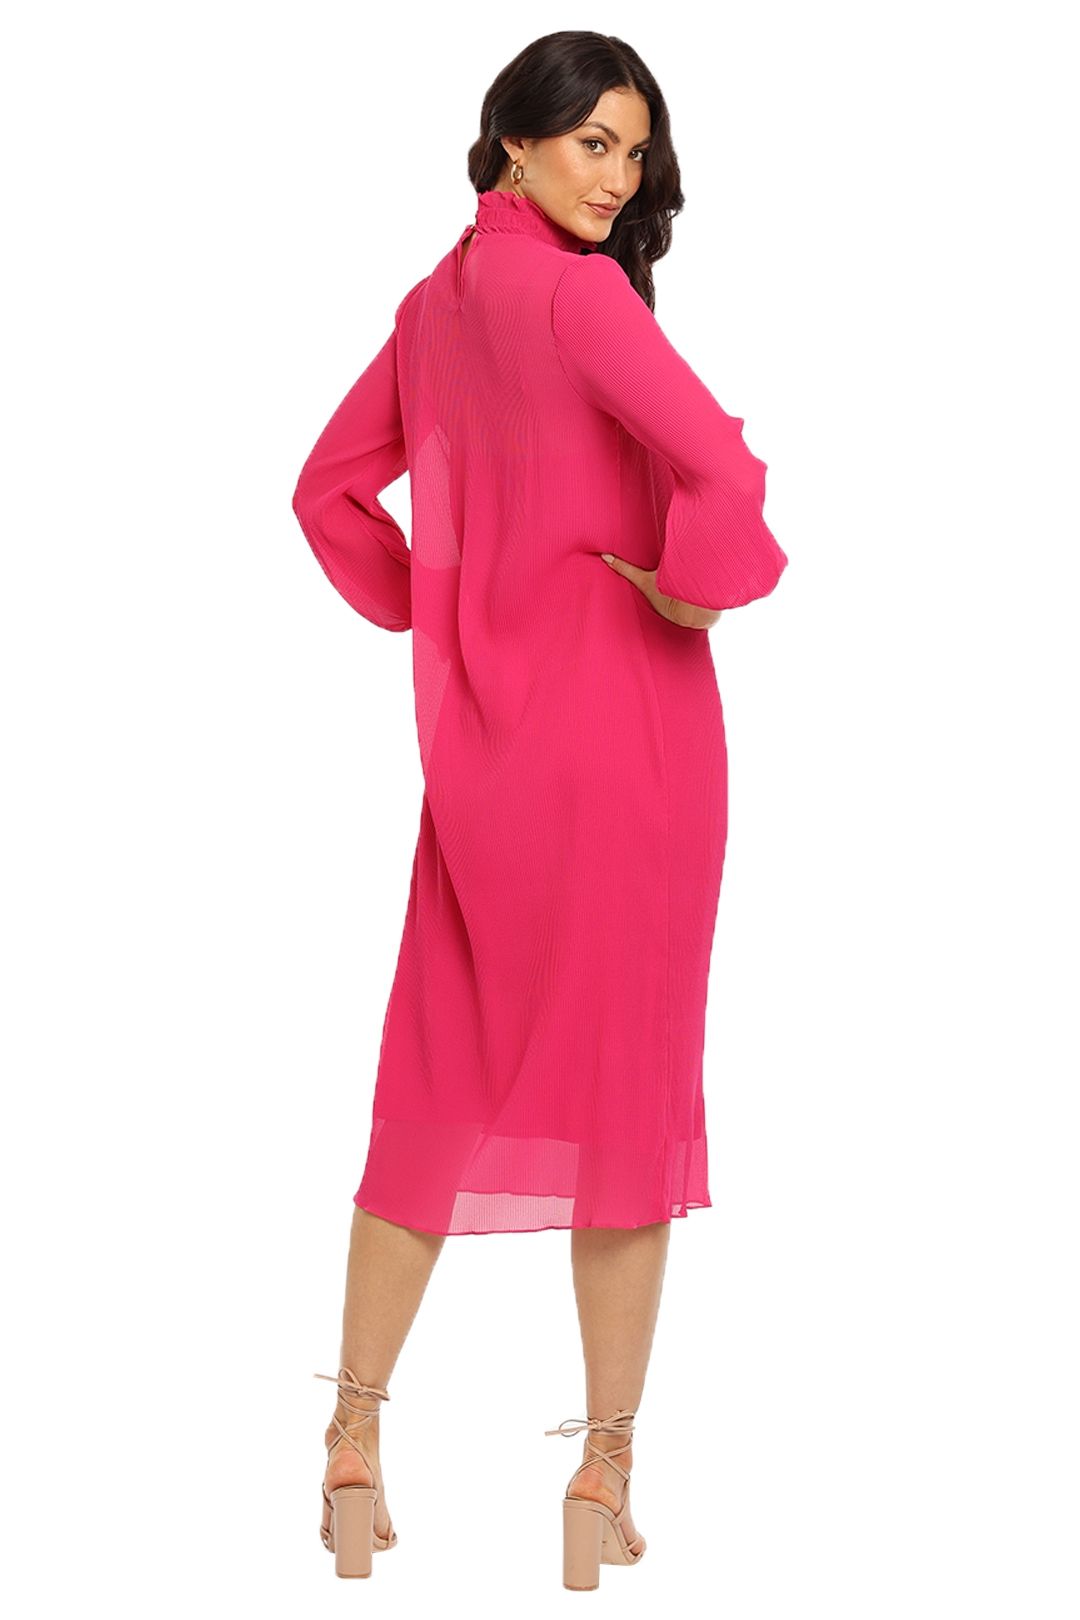 Kate Sylvester Lux Shift Dress Pink Long Sleeves